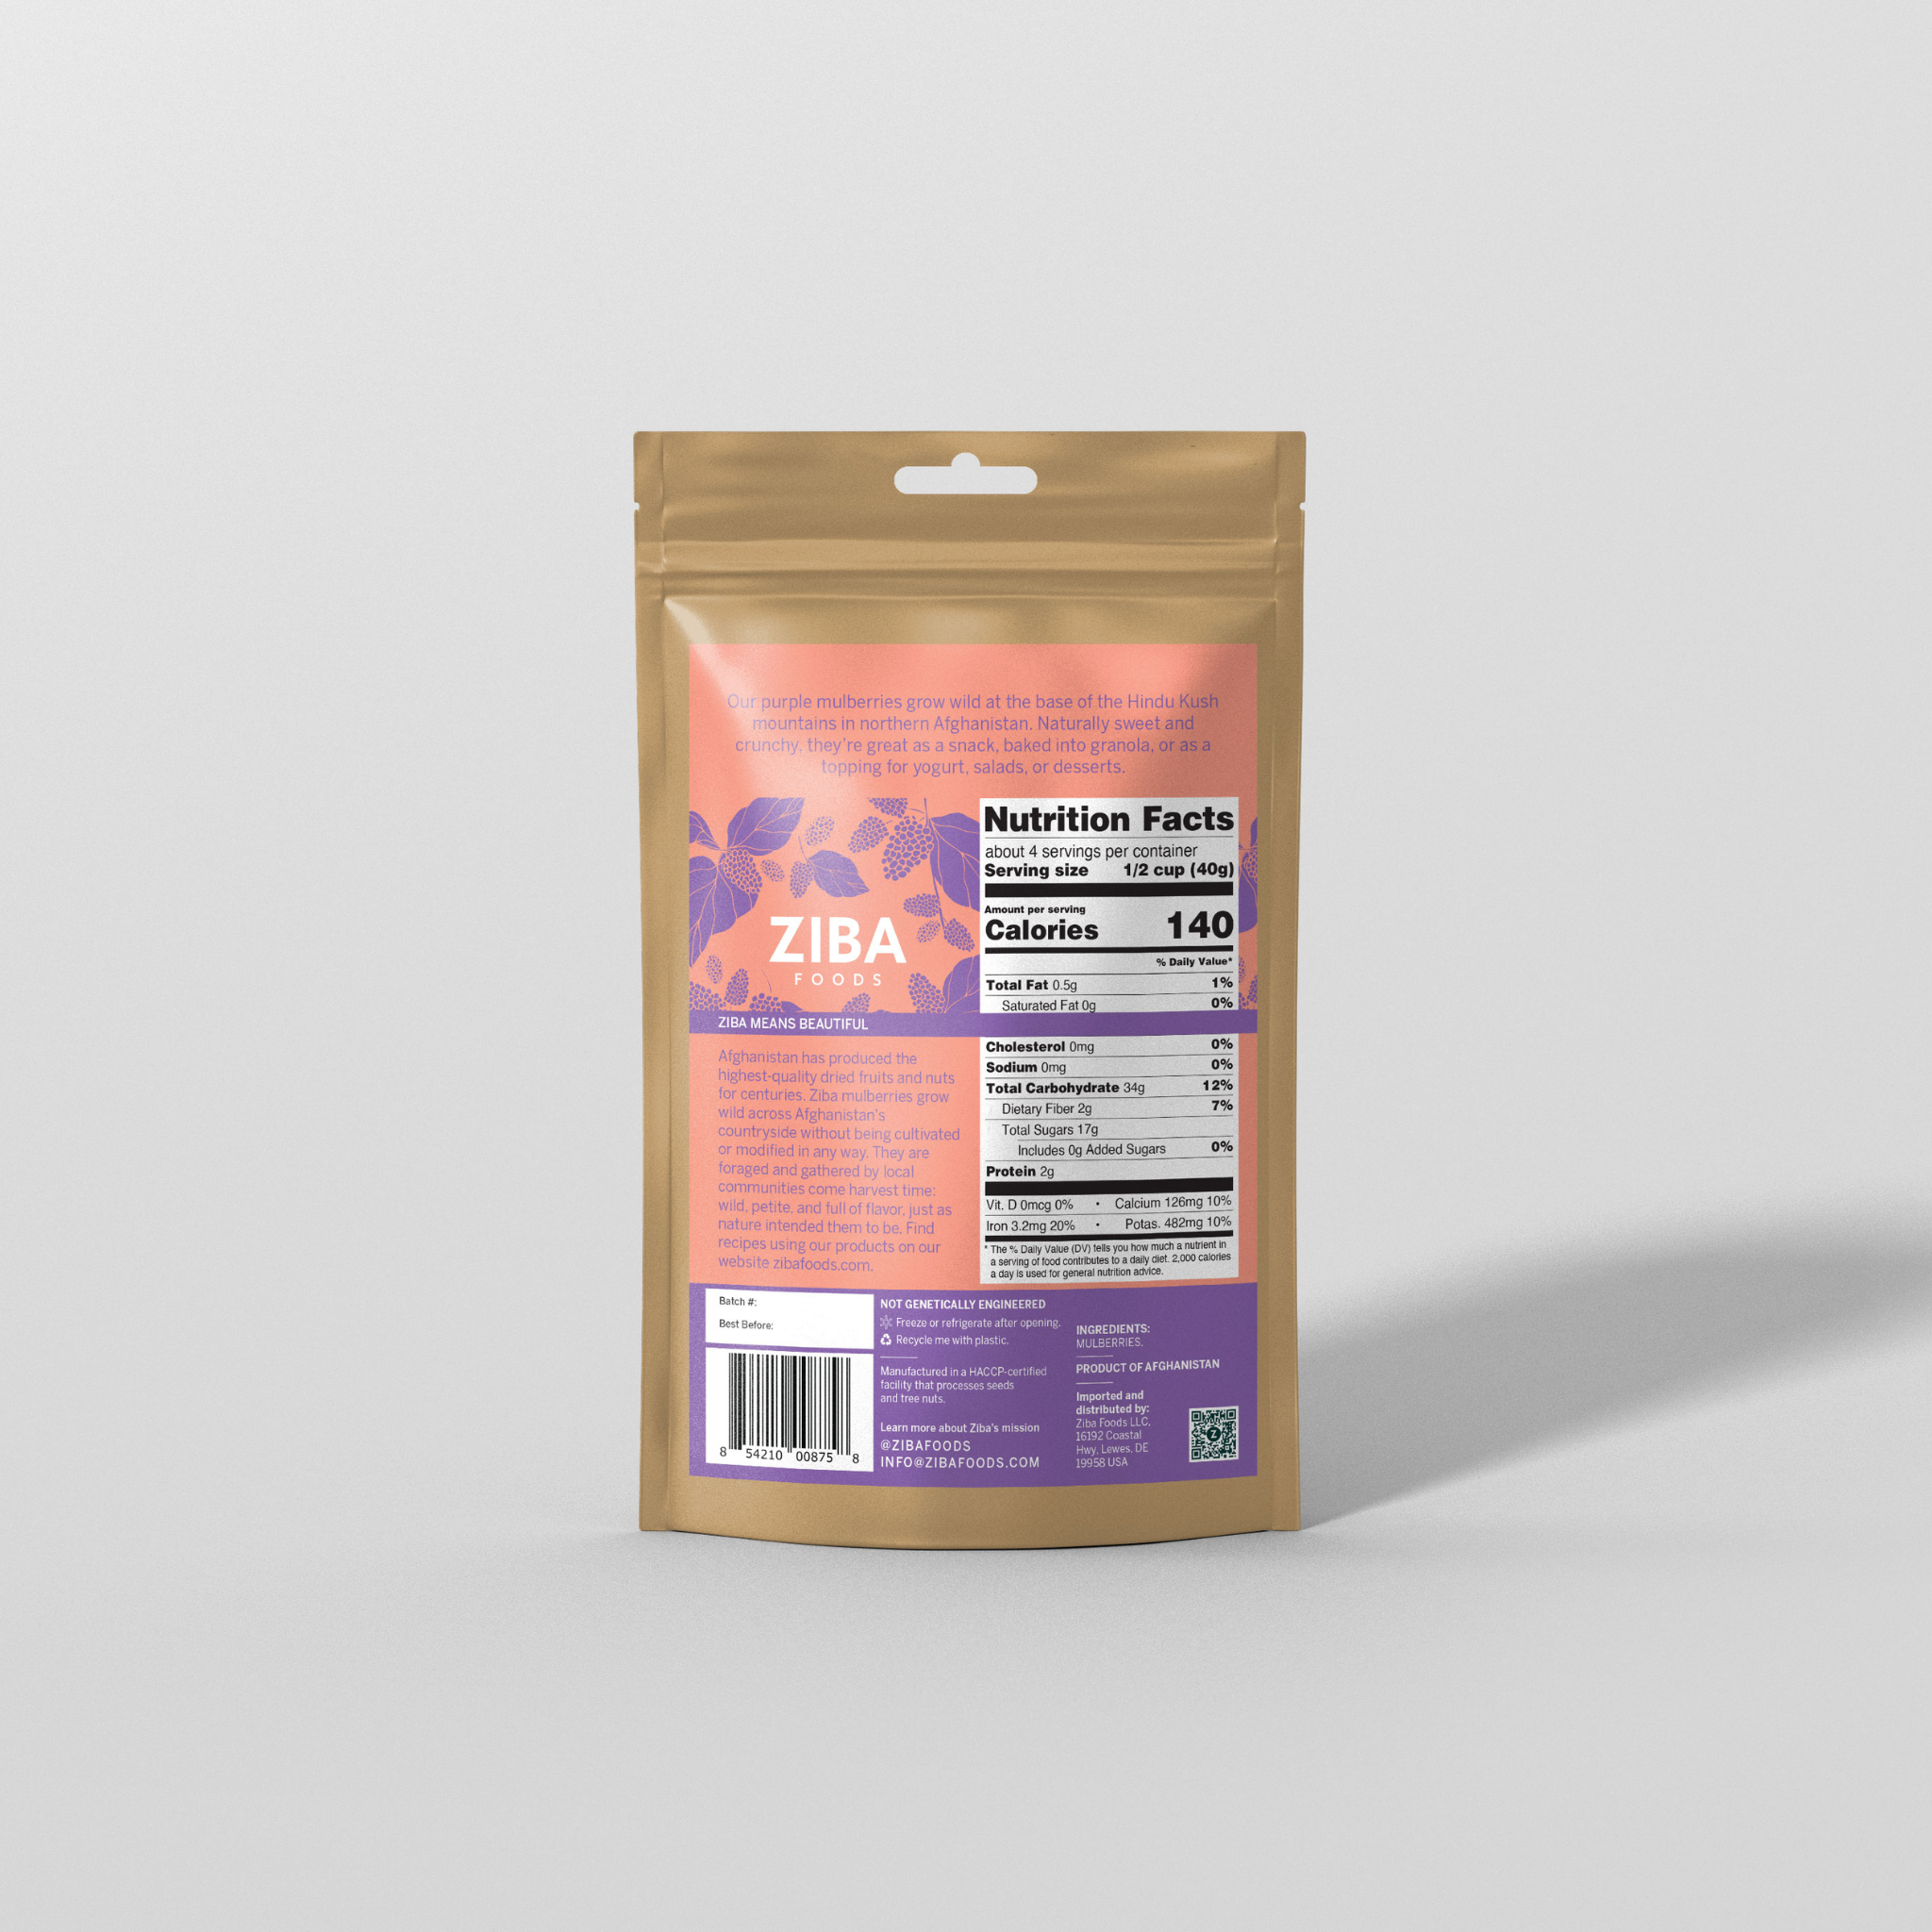 LIMITED EDITION - Dried Purple Mulberries - 5.3oz Bag